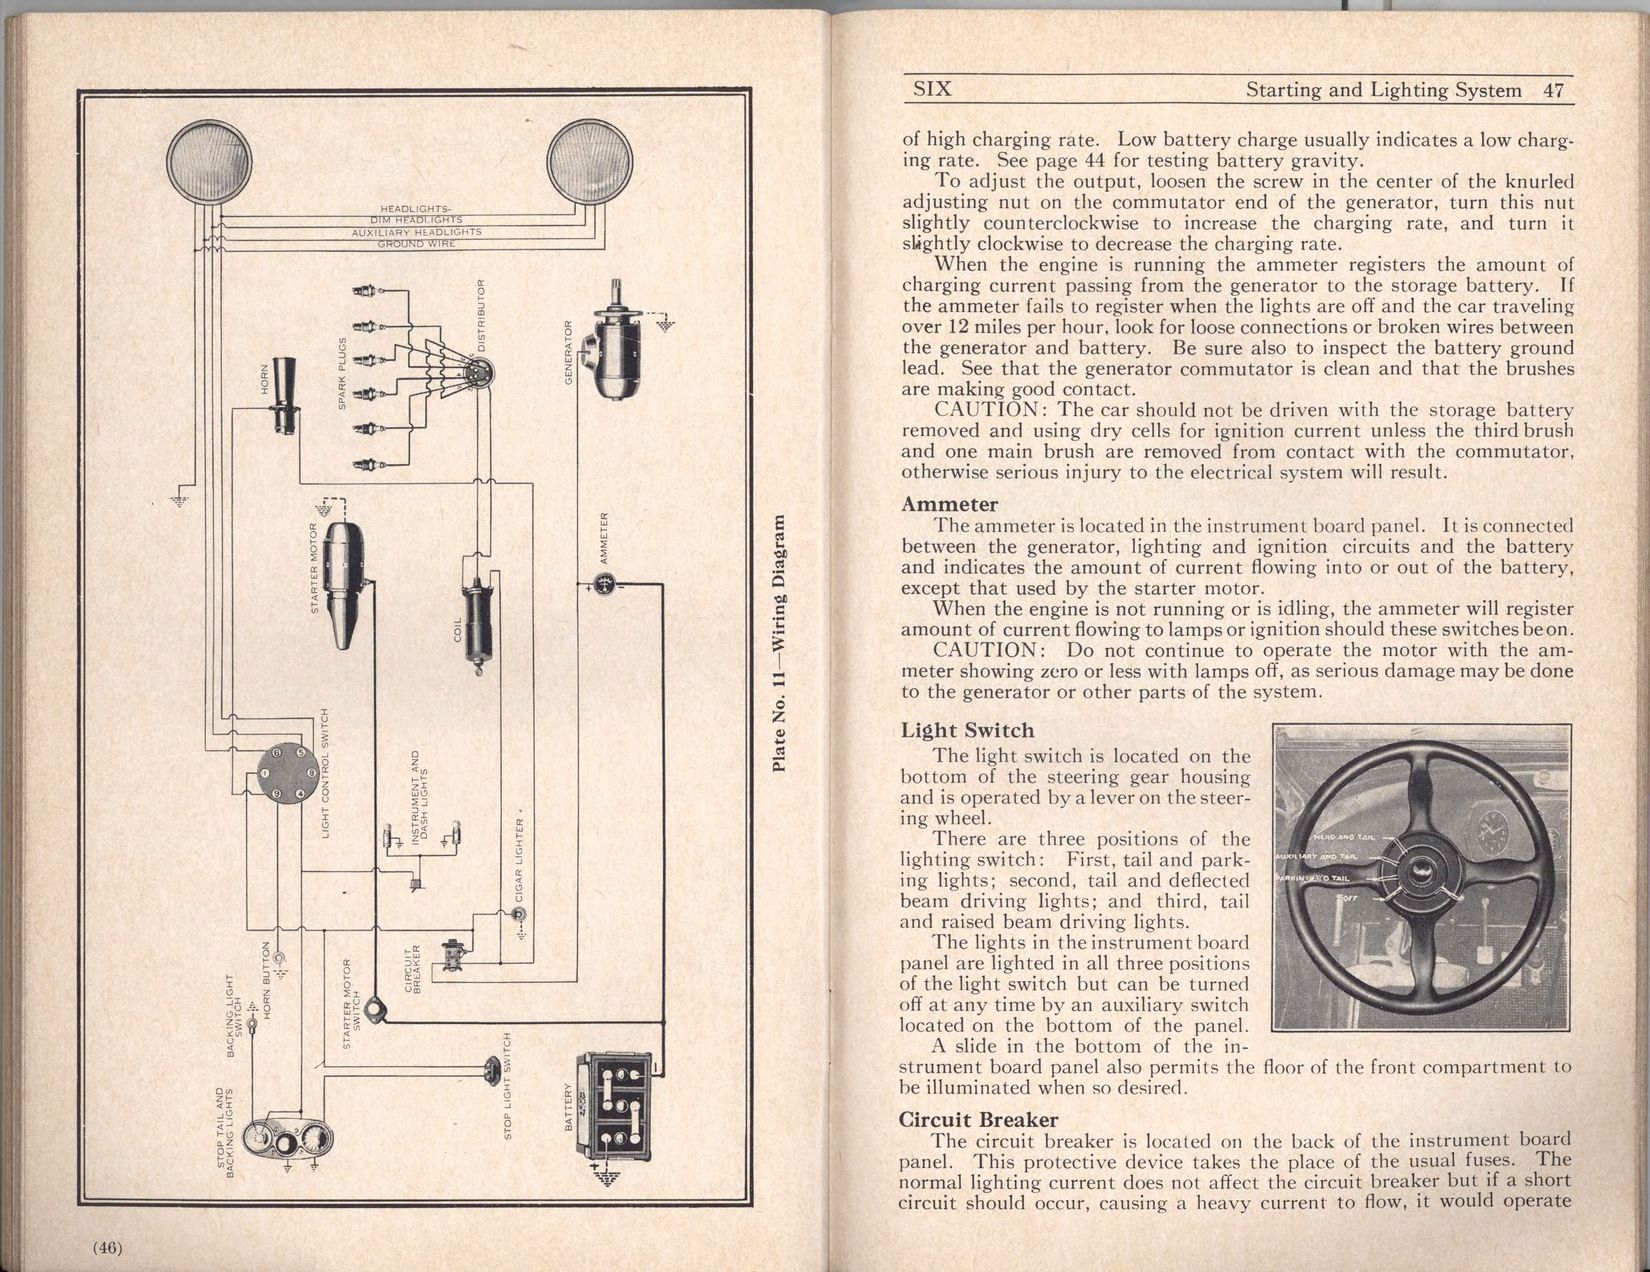 1927 Packard Six Owners Manual Page 30